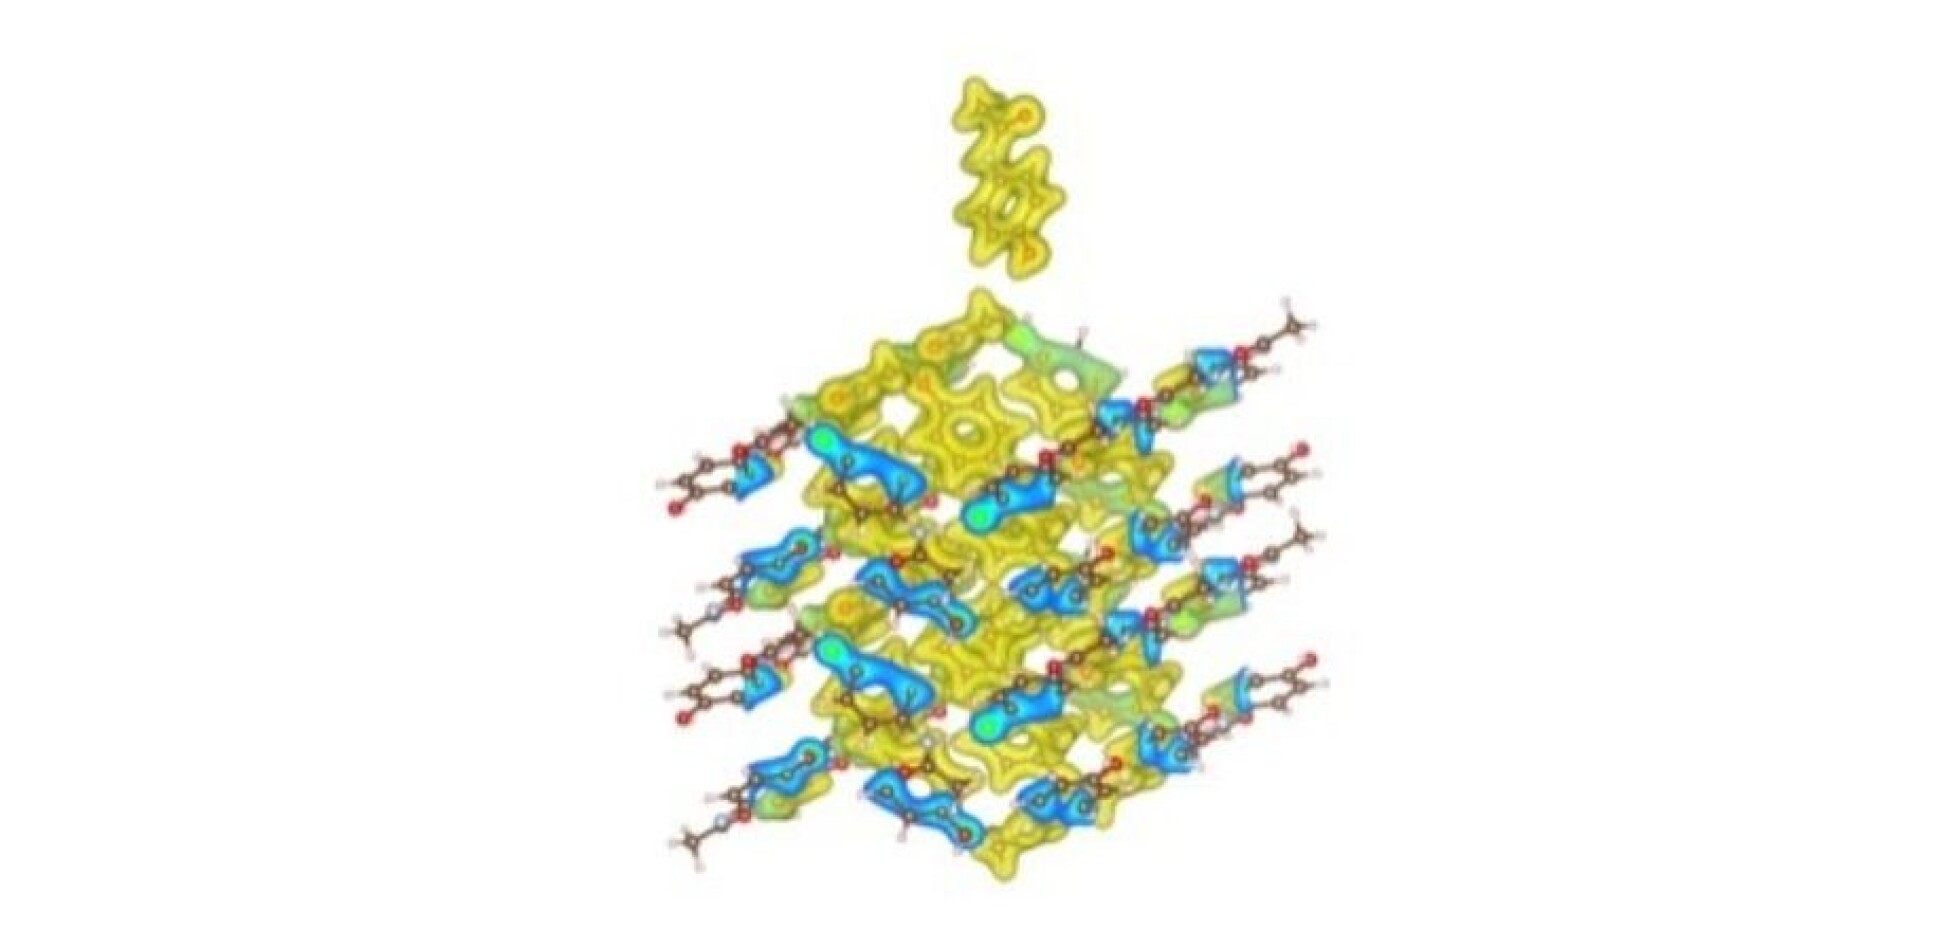 A computer-generated model of a paracetamol molecule attaching to the surface of a paracetamol crystal, showing the atoms and the electronic charge density.